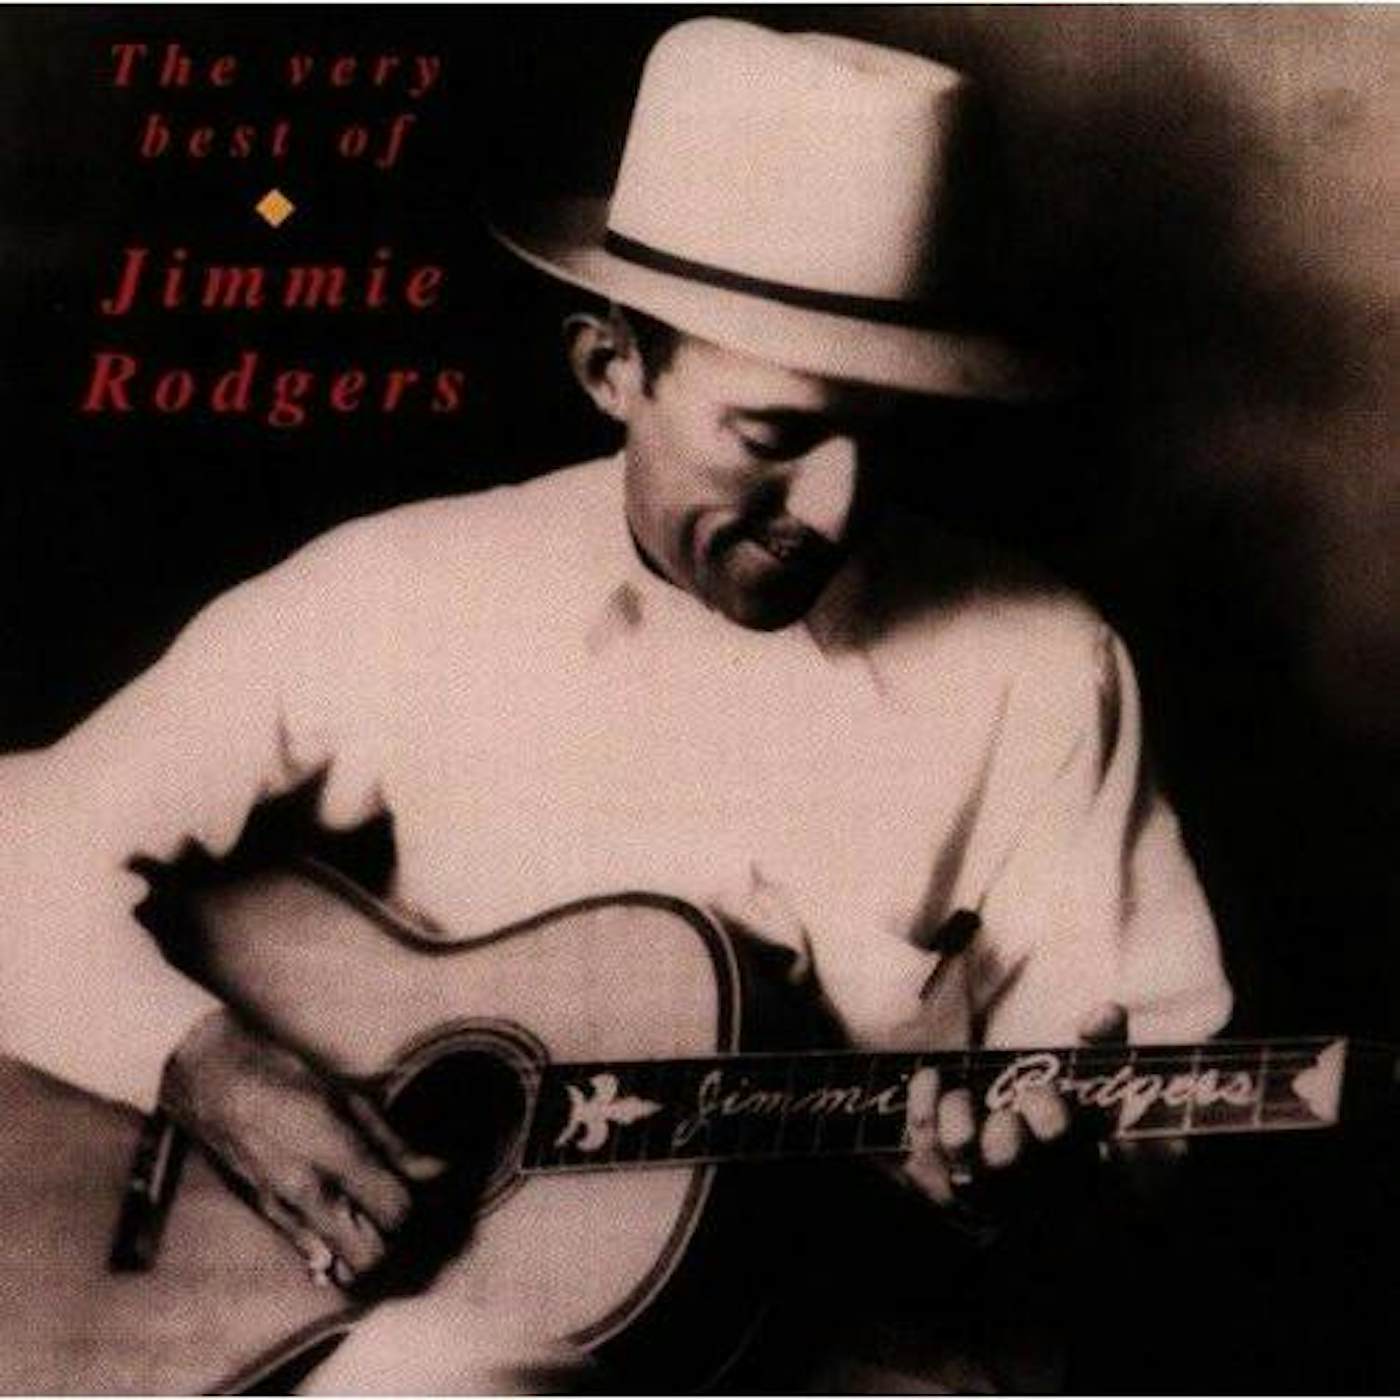 Jimmie Rodgers VERY BEST OF CD